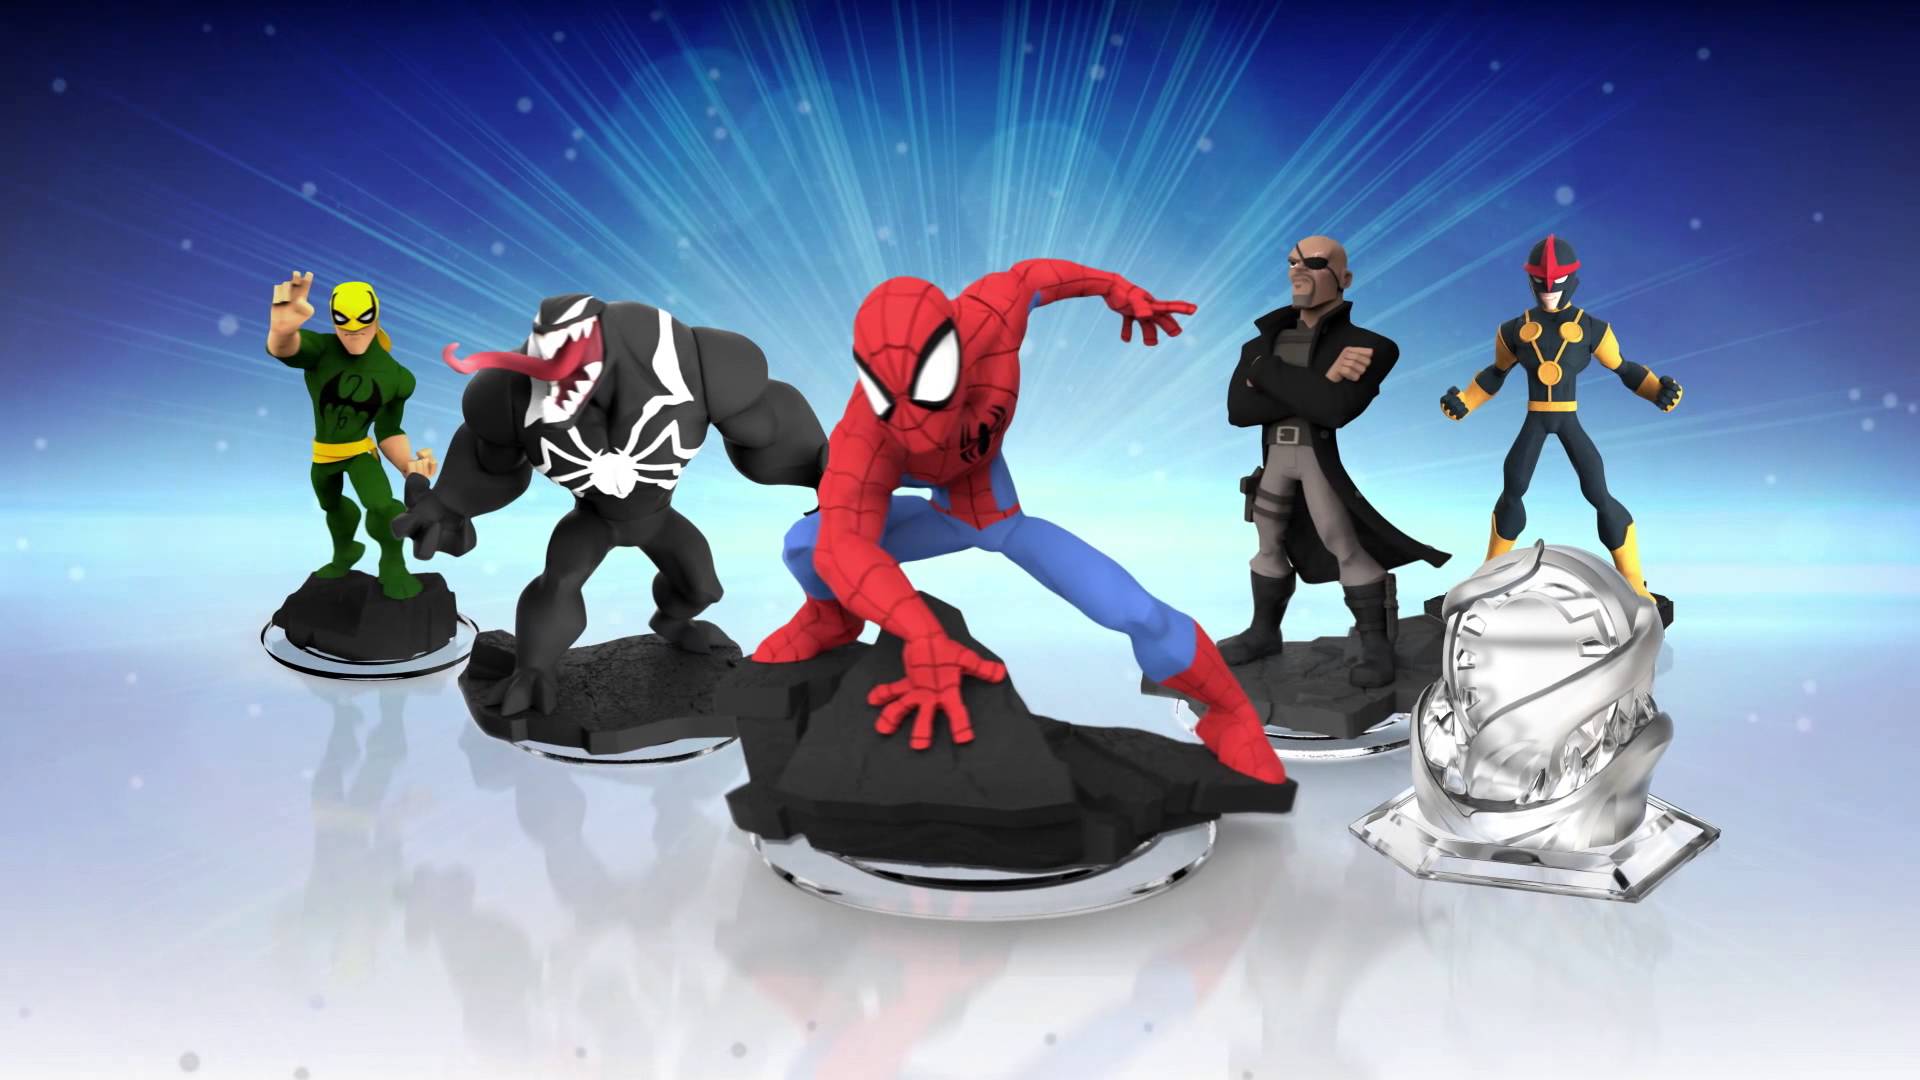 Disney is Shutting Down Disney Infinity, You've Got Until March 3rd, 2017 to Have Your Fun